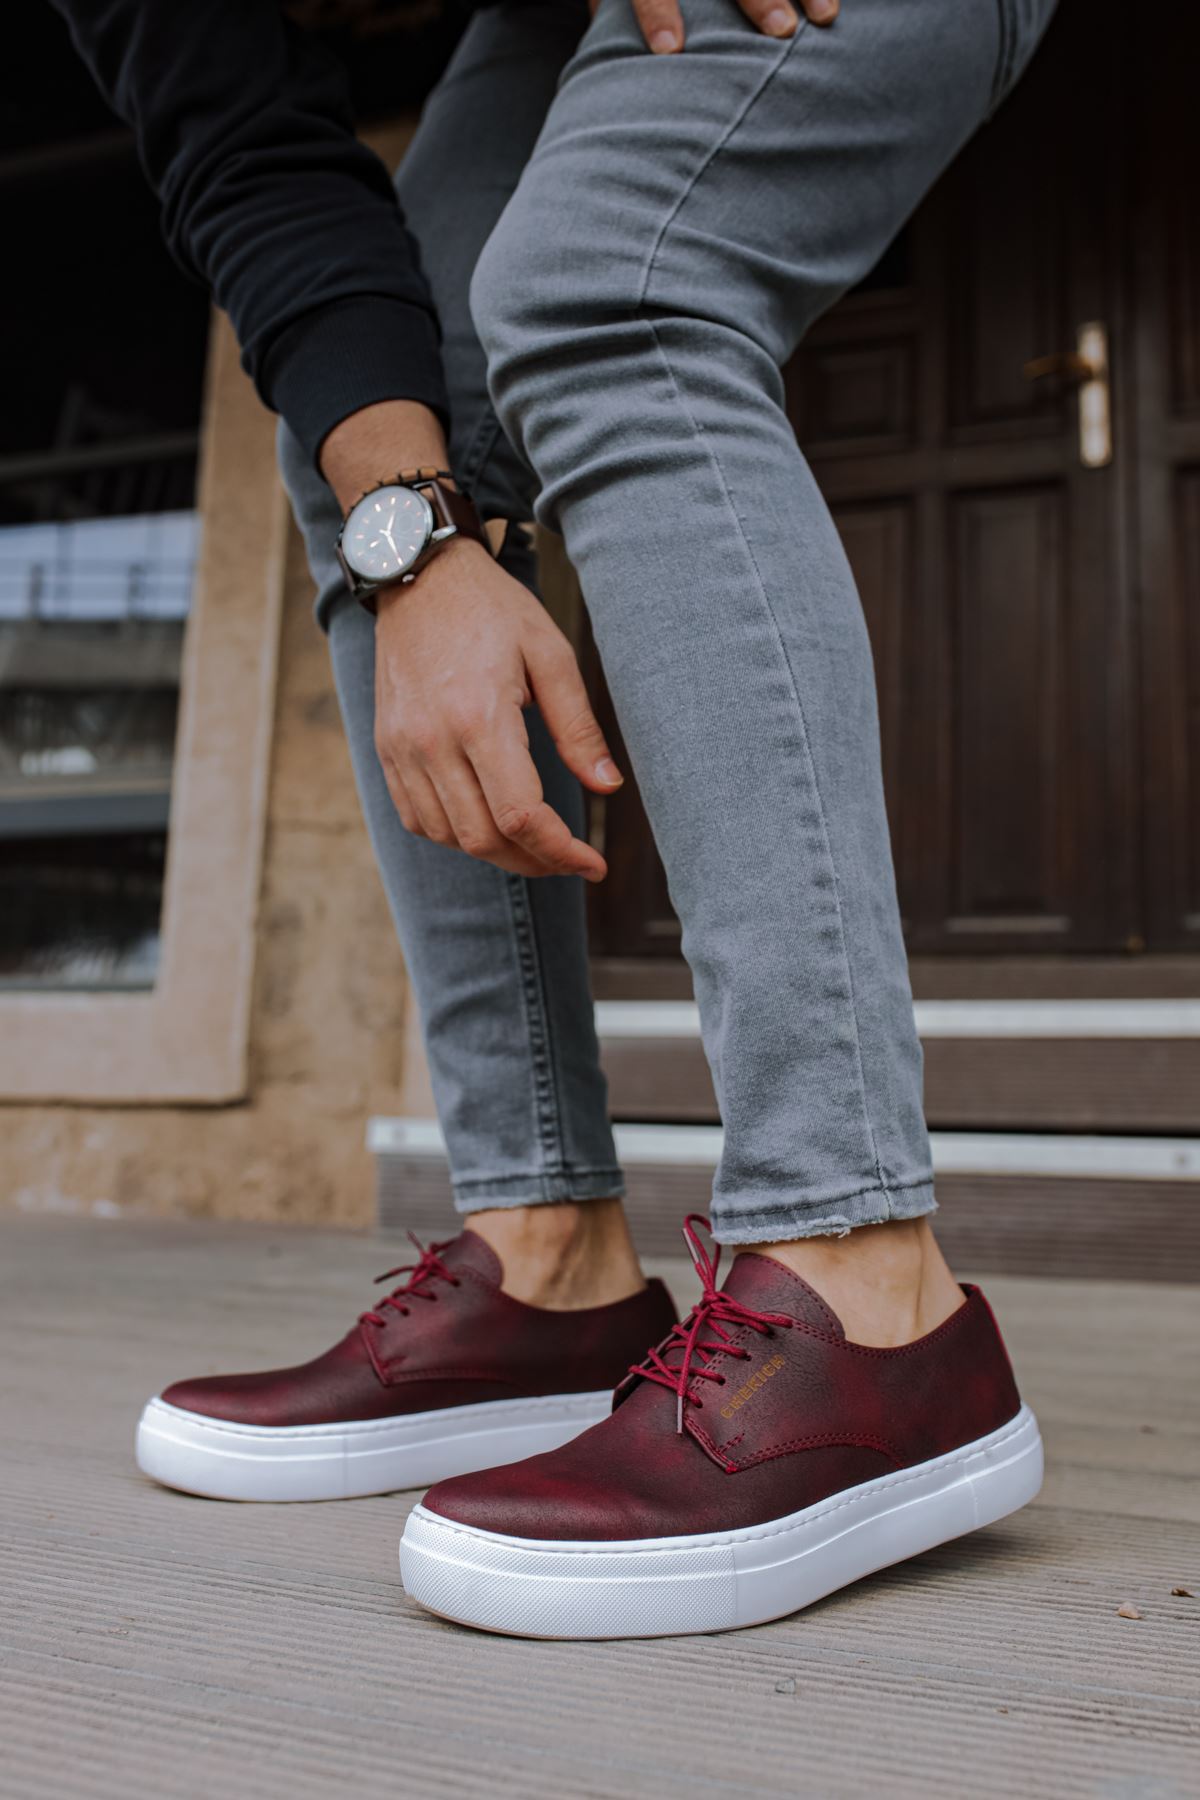 Chekich Men's Shoes Claret Red Faux Leather Laced Summer Season Sneakers Casual High Outsole Comfortable Flexible Fashion Wedding Suits Lightweight Sneakers Air Running Sewing Breathable CH005 V2